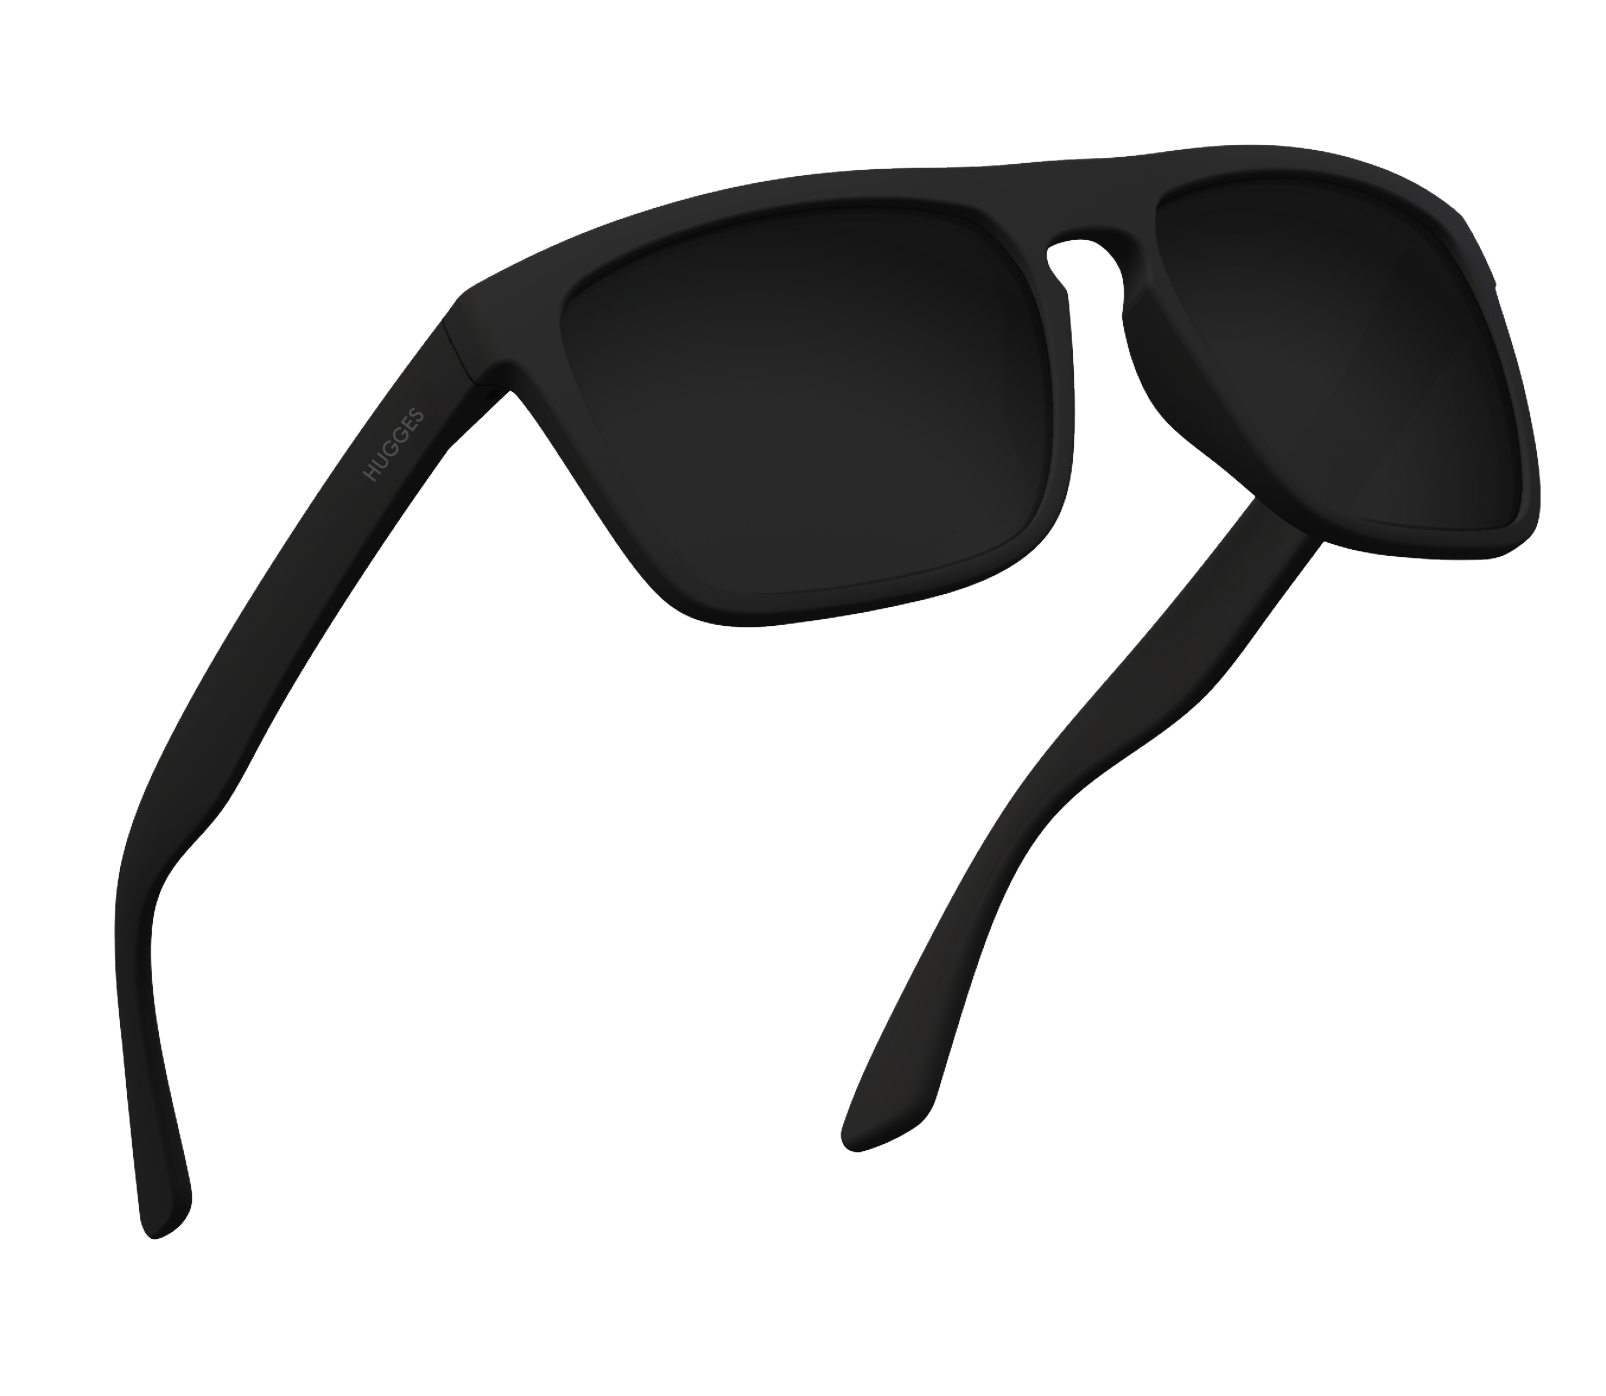 A photo of a pair of black sunglasses.